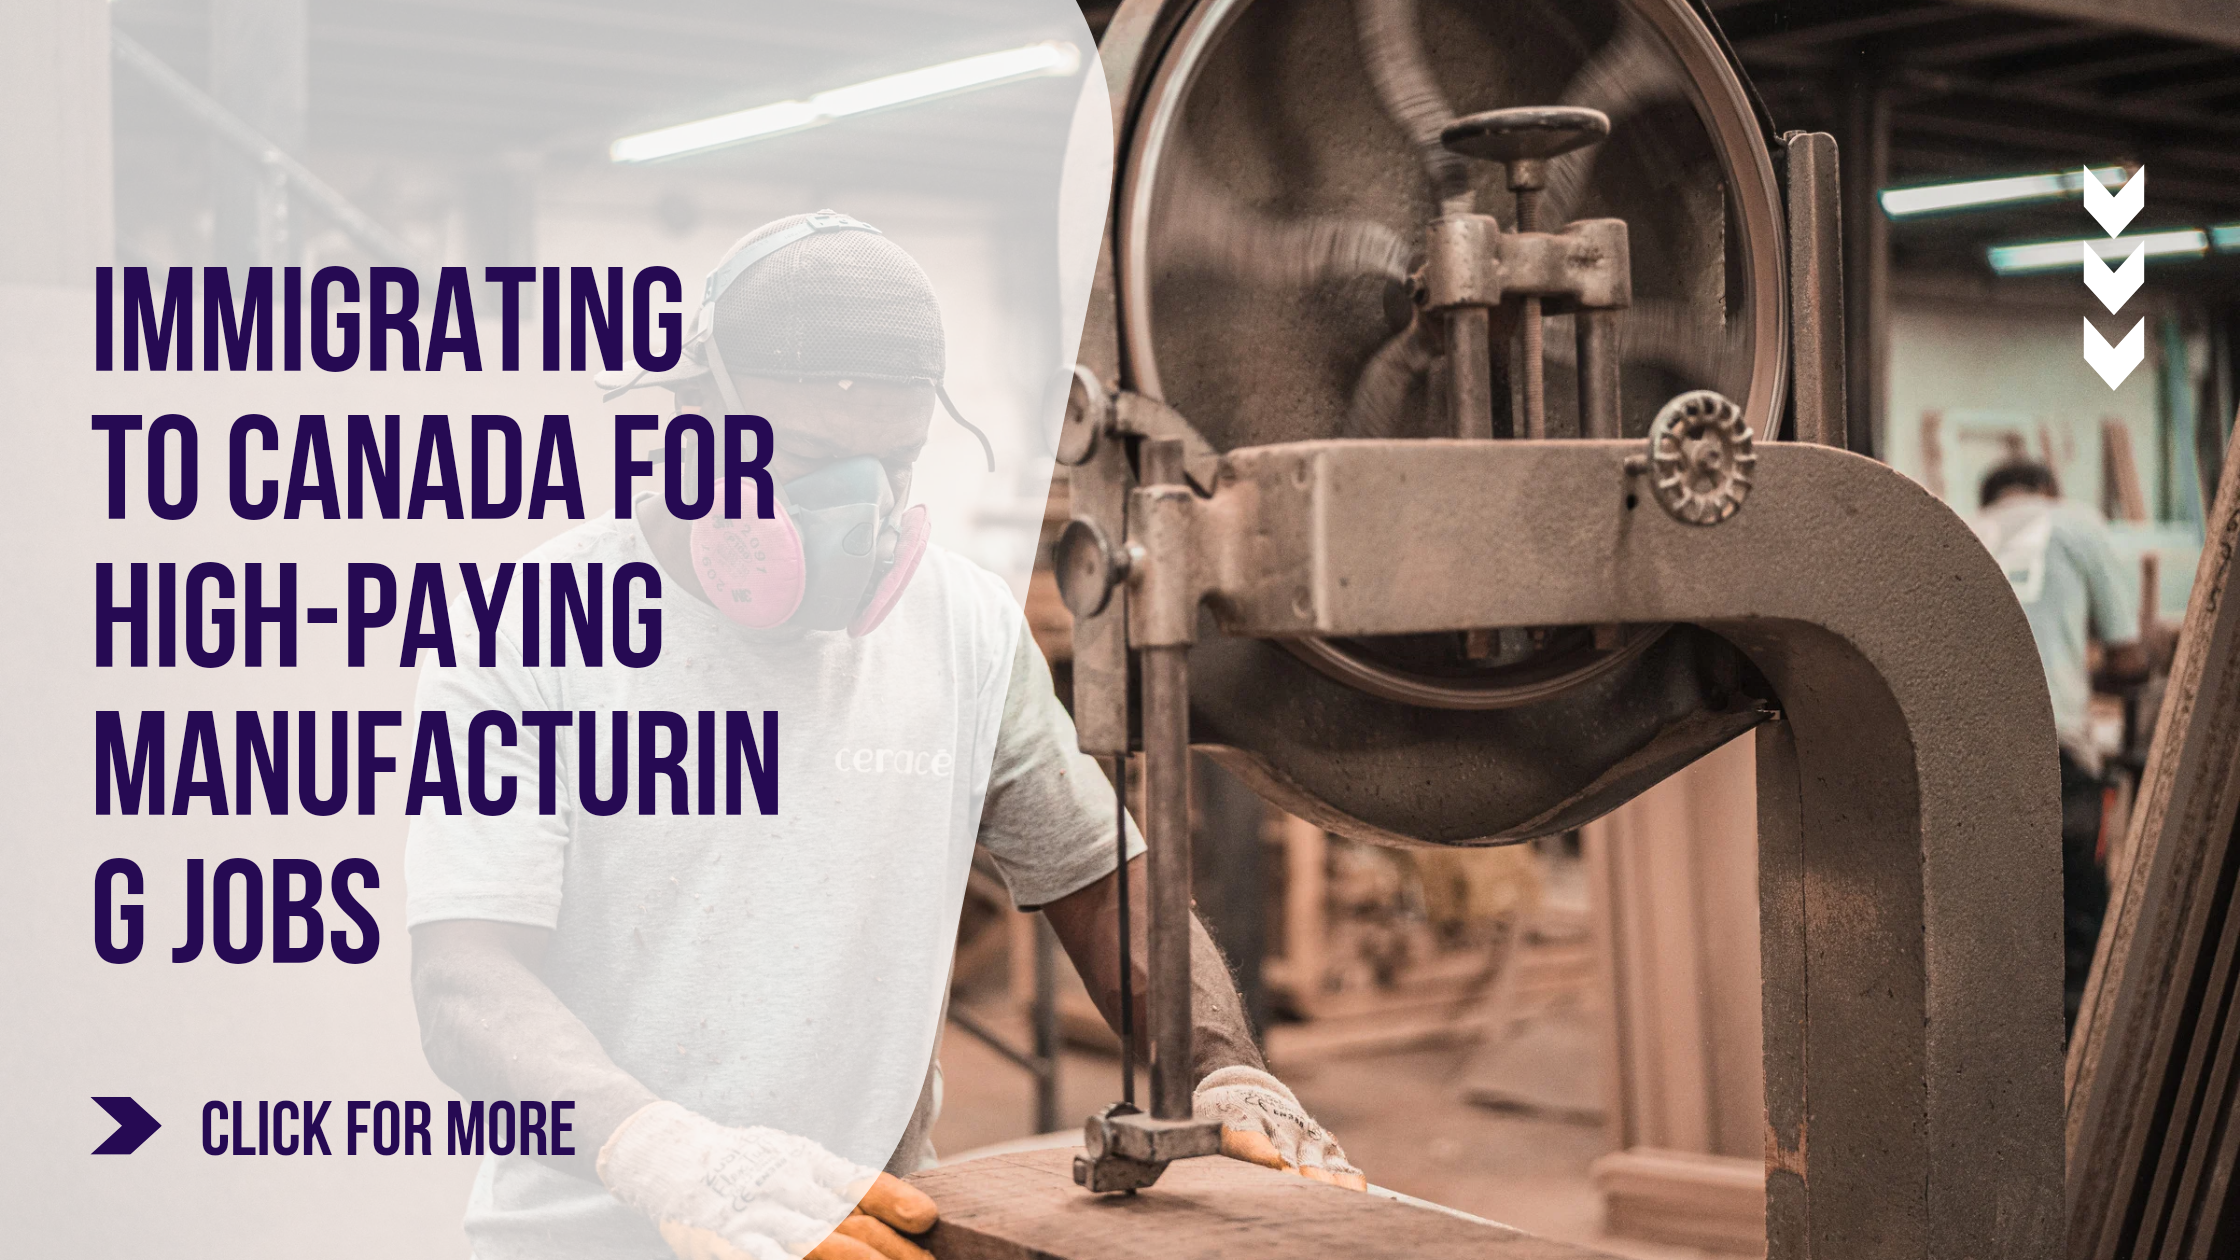 The Benefits of Immigrating to Canada for High-Paying Manufacturing Jobs